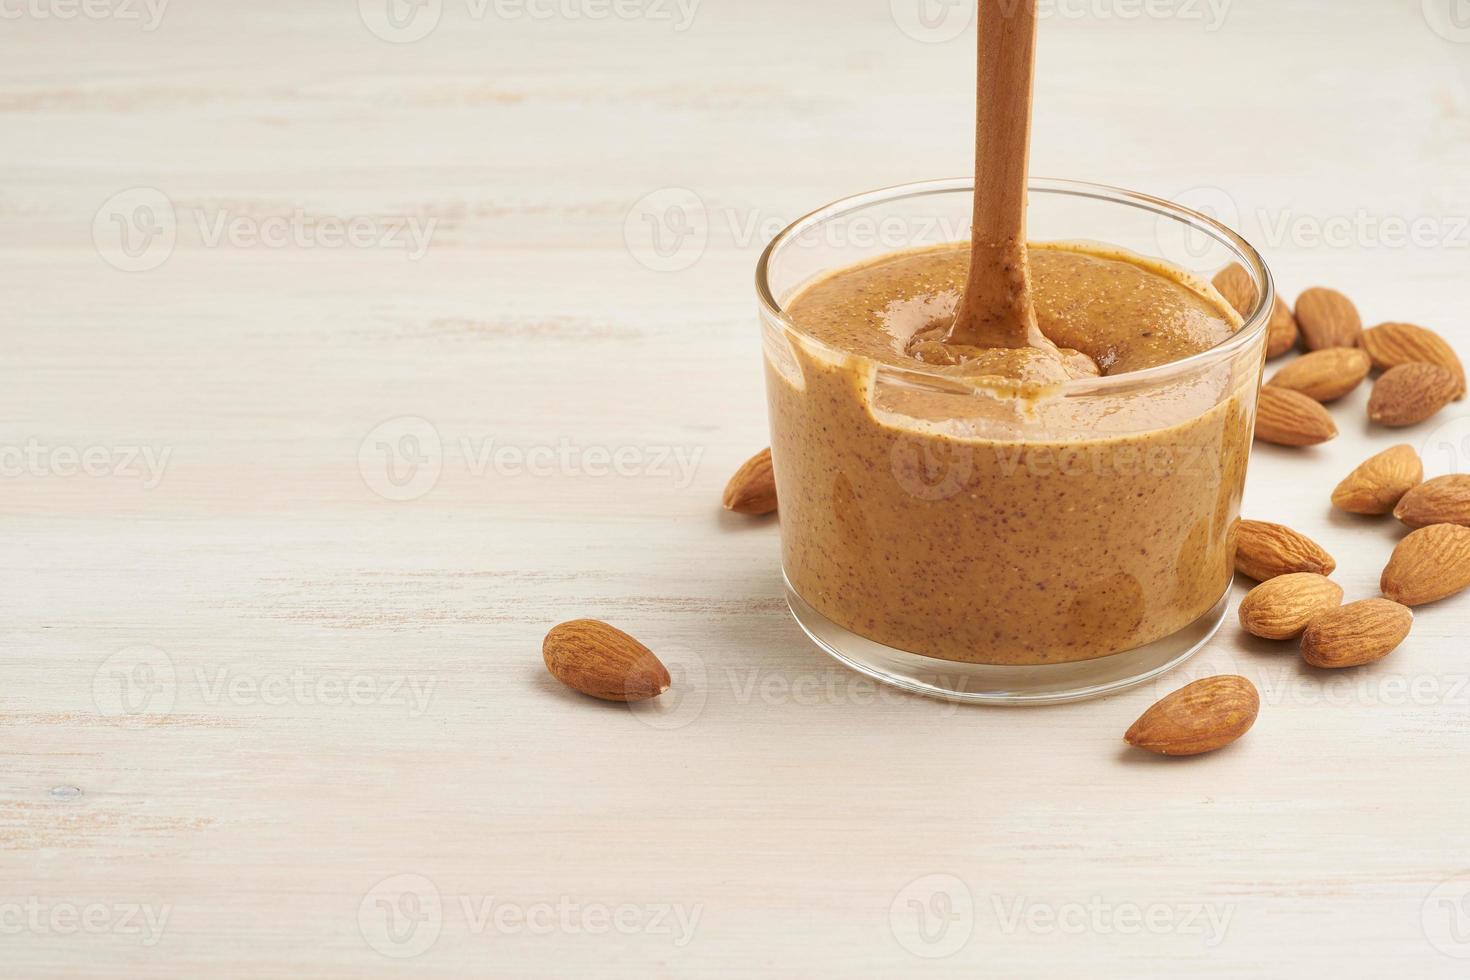 almond butter, raw food paste made from grinding almonds into nut butter, crunchy and stir, white wooden table, copy space photo